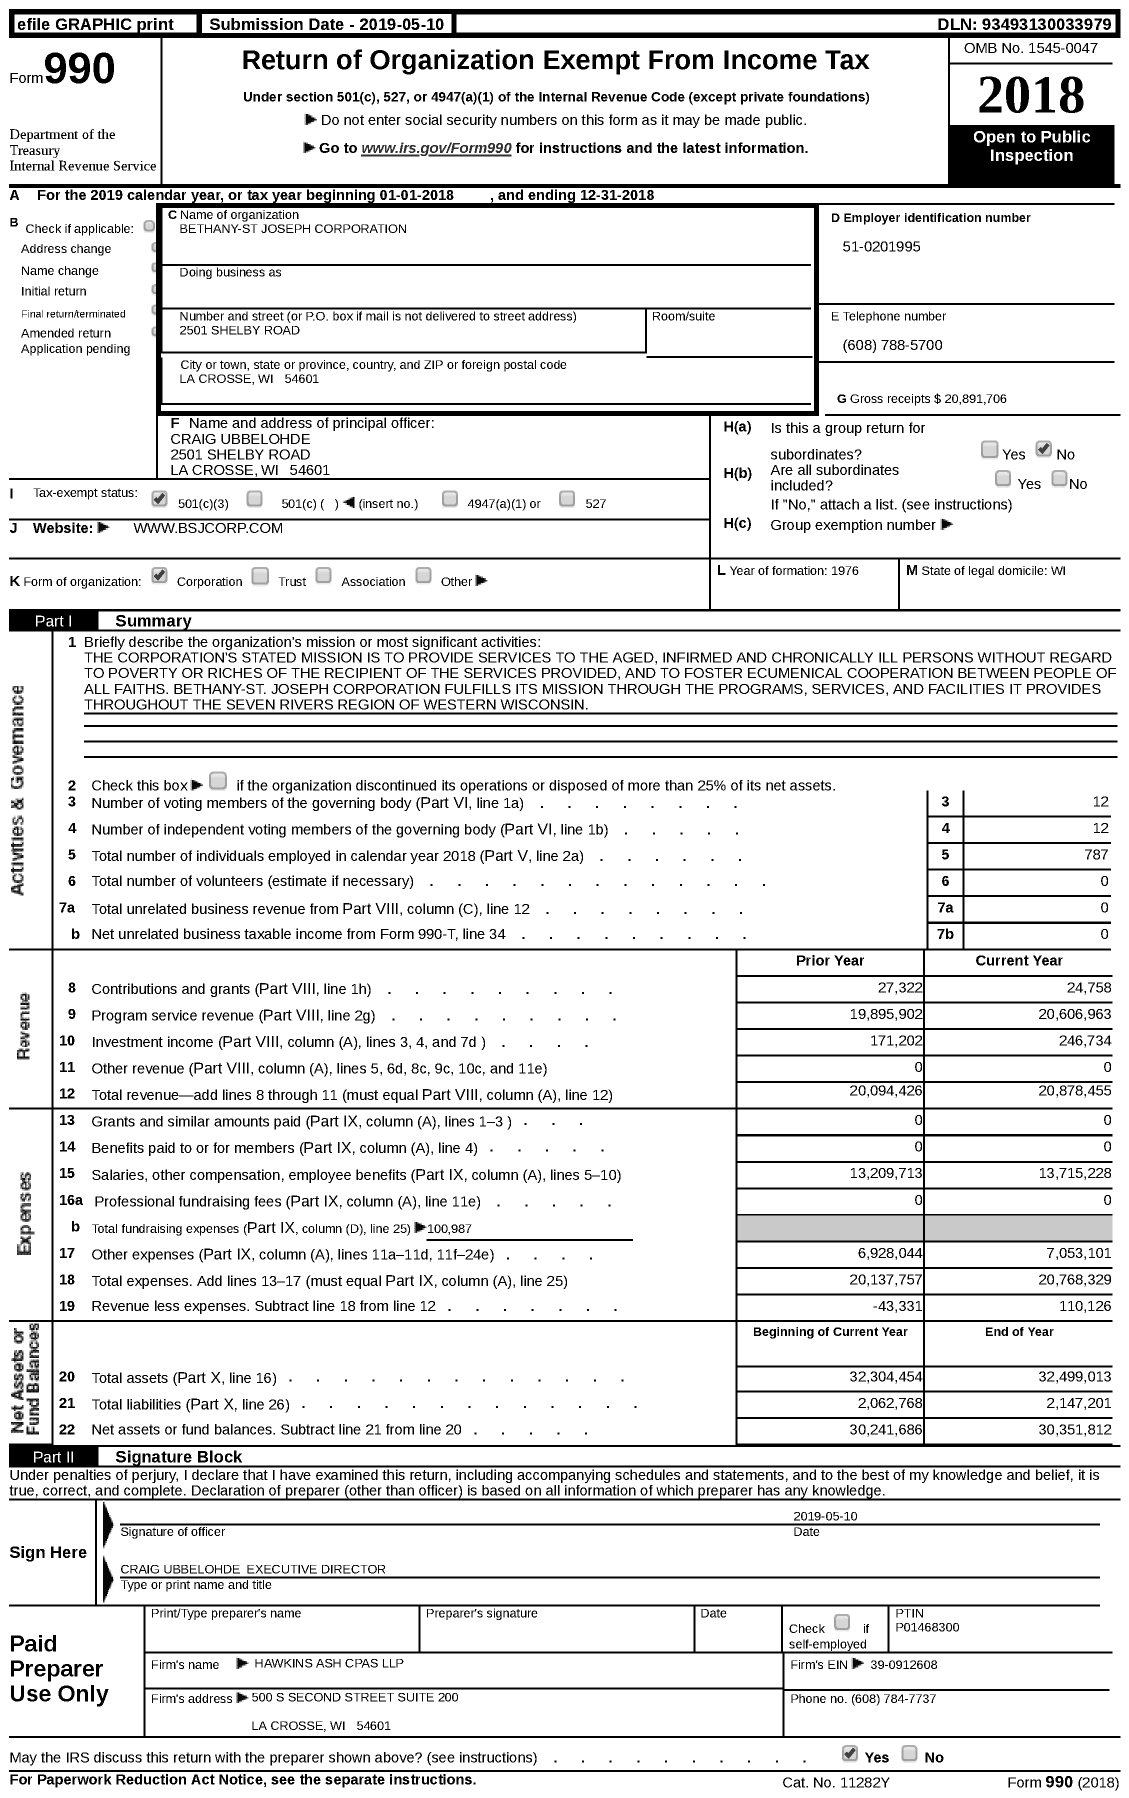 Image of first page of 2018 Form 990 for Bethany St Joseph Corporation (BSJ)